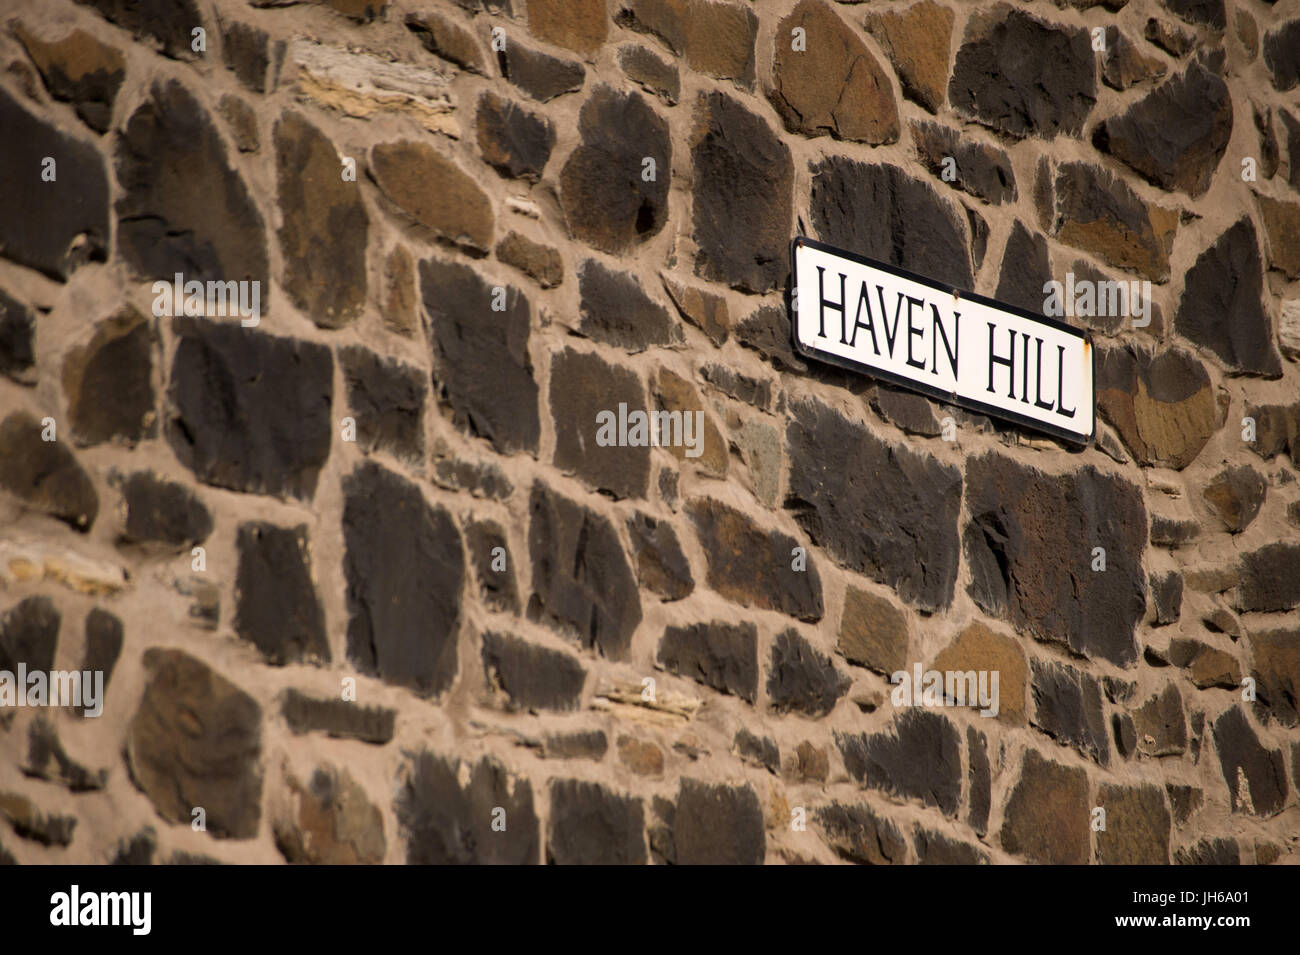 Haven Hill street sign, Craster, Northumberland Stock Photo